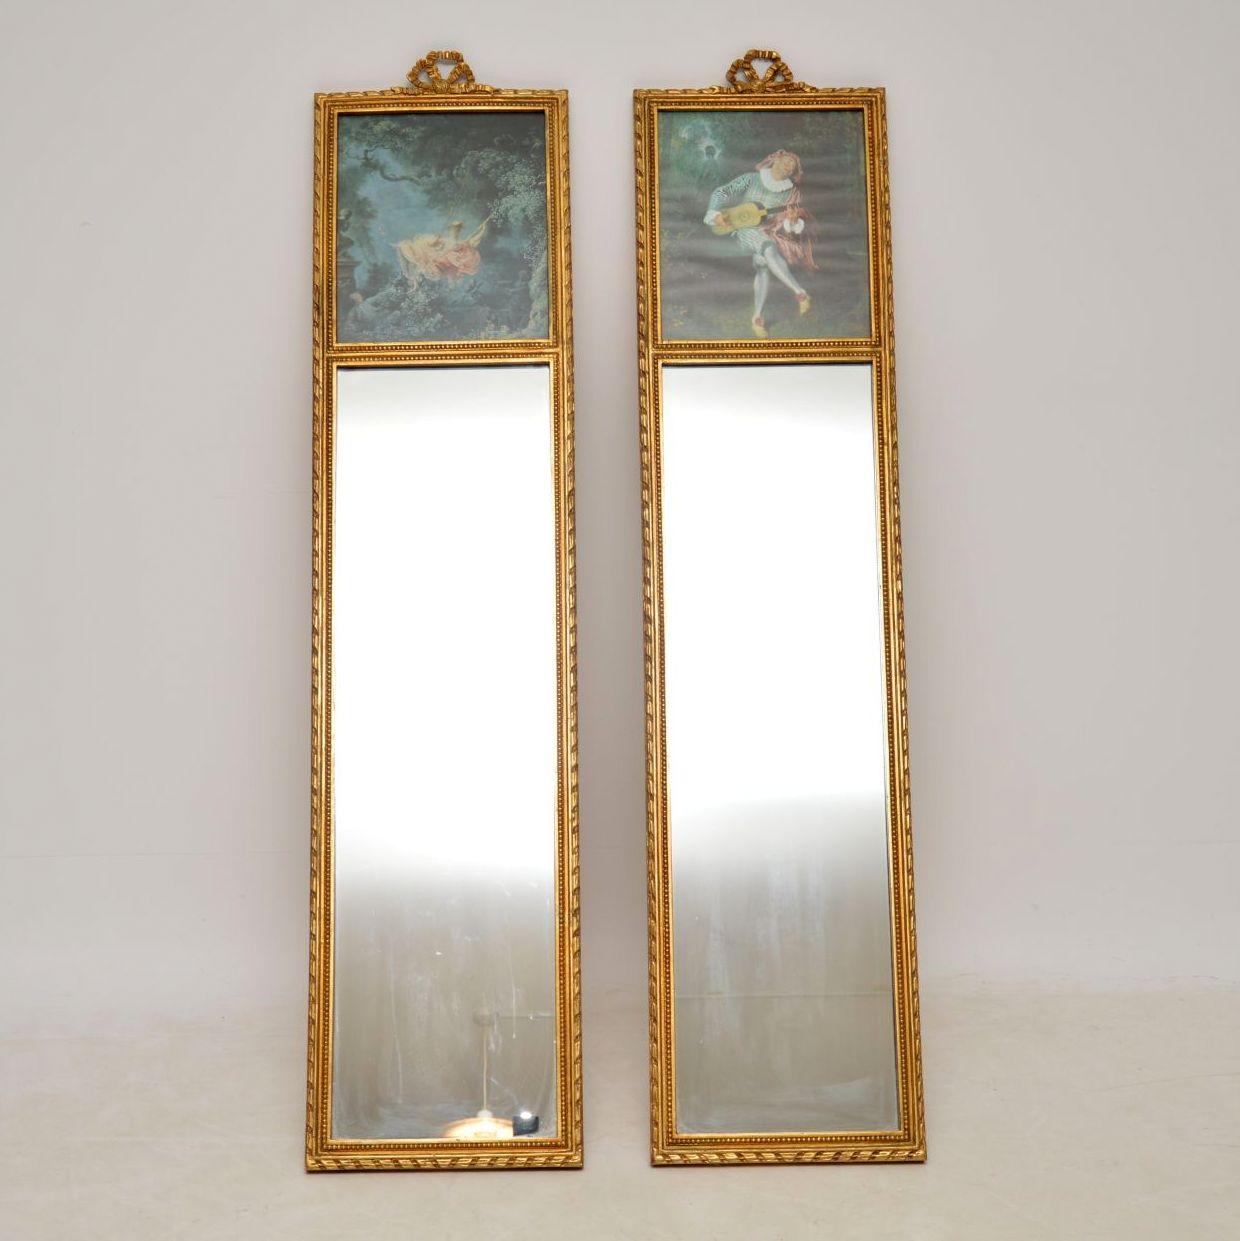 Pair of antique giltwood mirrors with decorative panels on the tops and in good condition. The gilt work seems all original with a nice soft color and very slight natural ageing. They have decorative bows on the tops. I would date them to circa